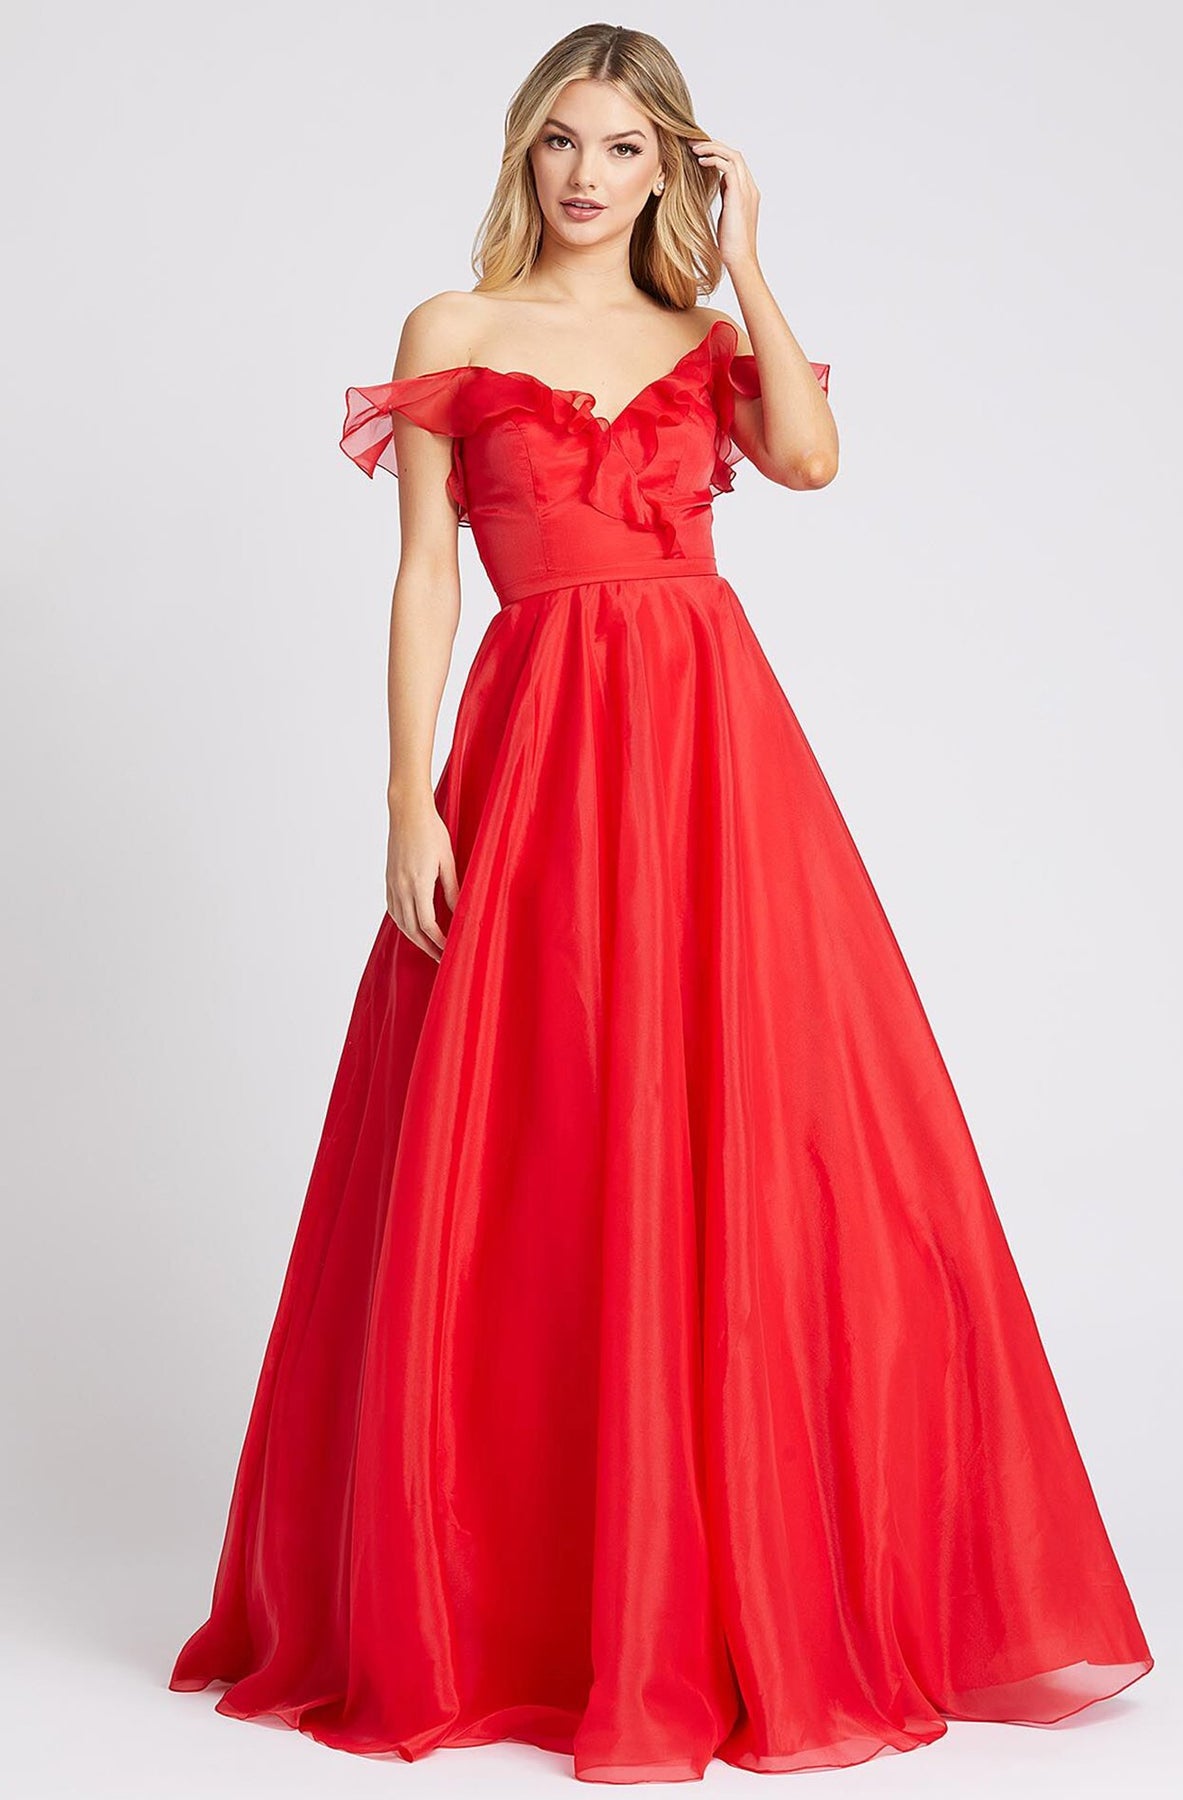 Ieena Duggal - 48942I Ruffled Off Shoulder V-Neck A-Line Gown In Red